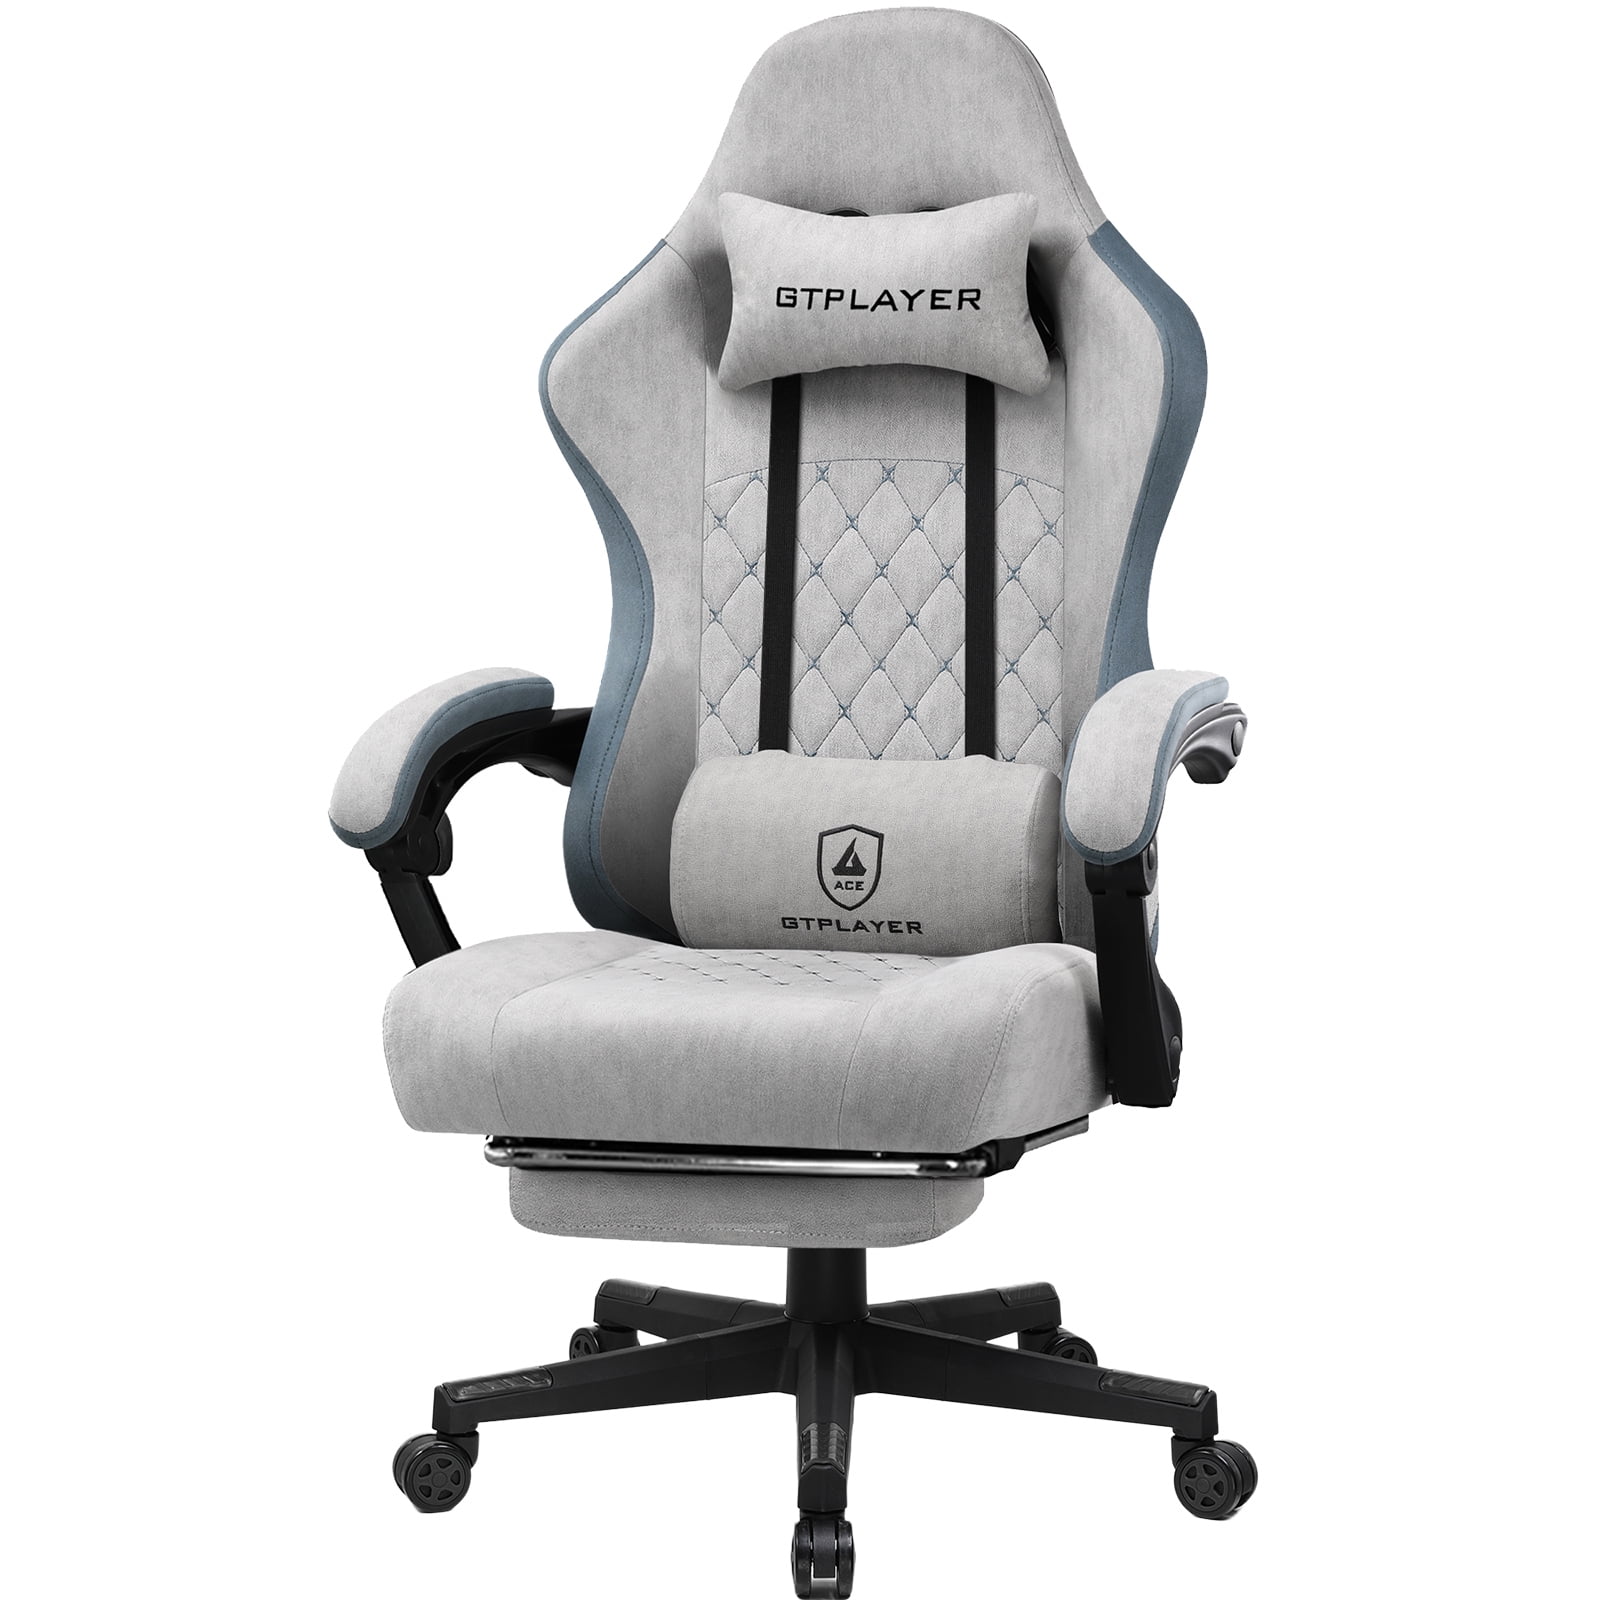 Gtplayer Gaming Chair with Footrest&Pocket Spring Cushion&Linkage Armrests Ergonomic Office Chair, Gray